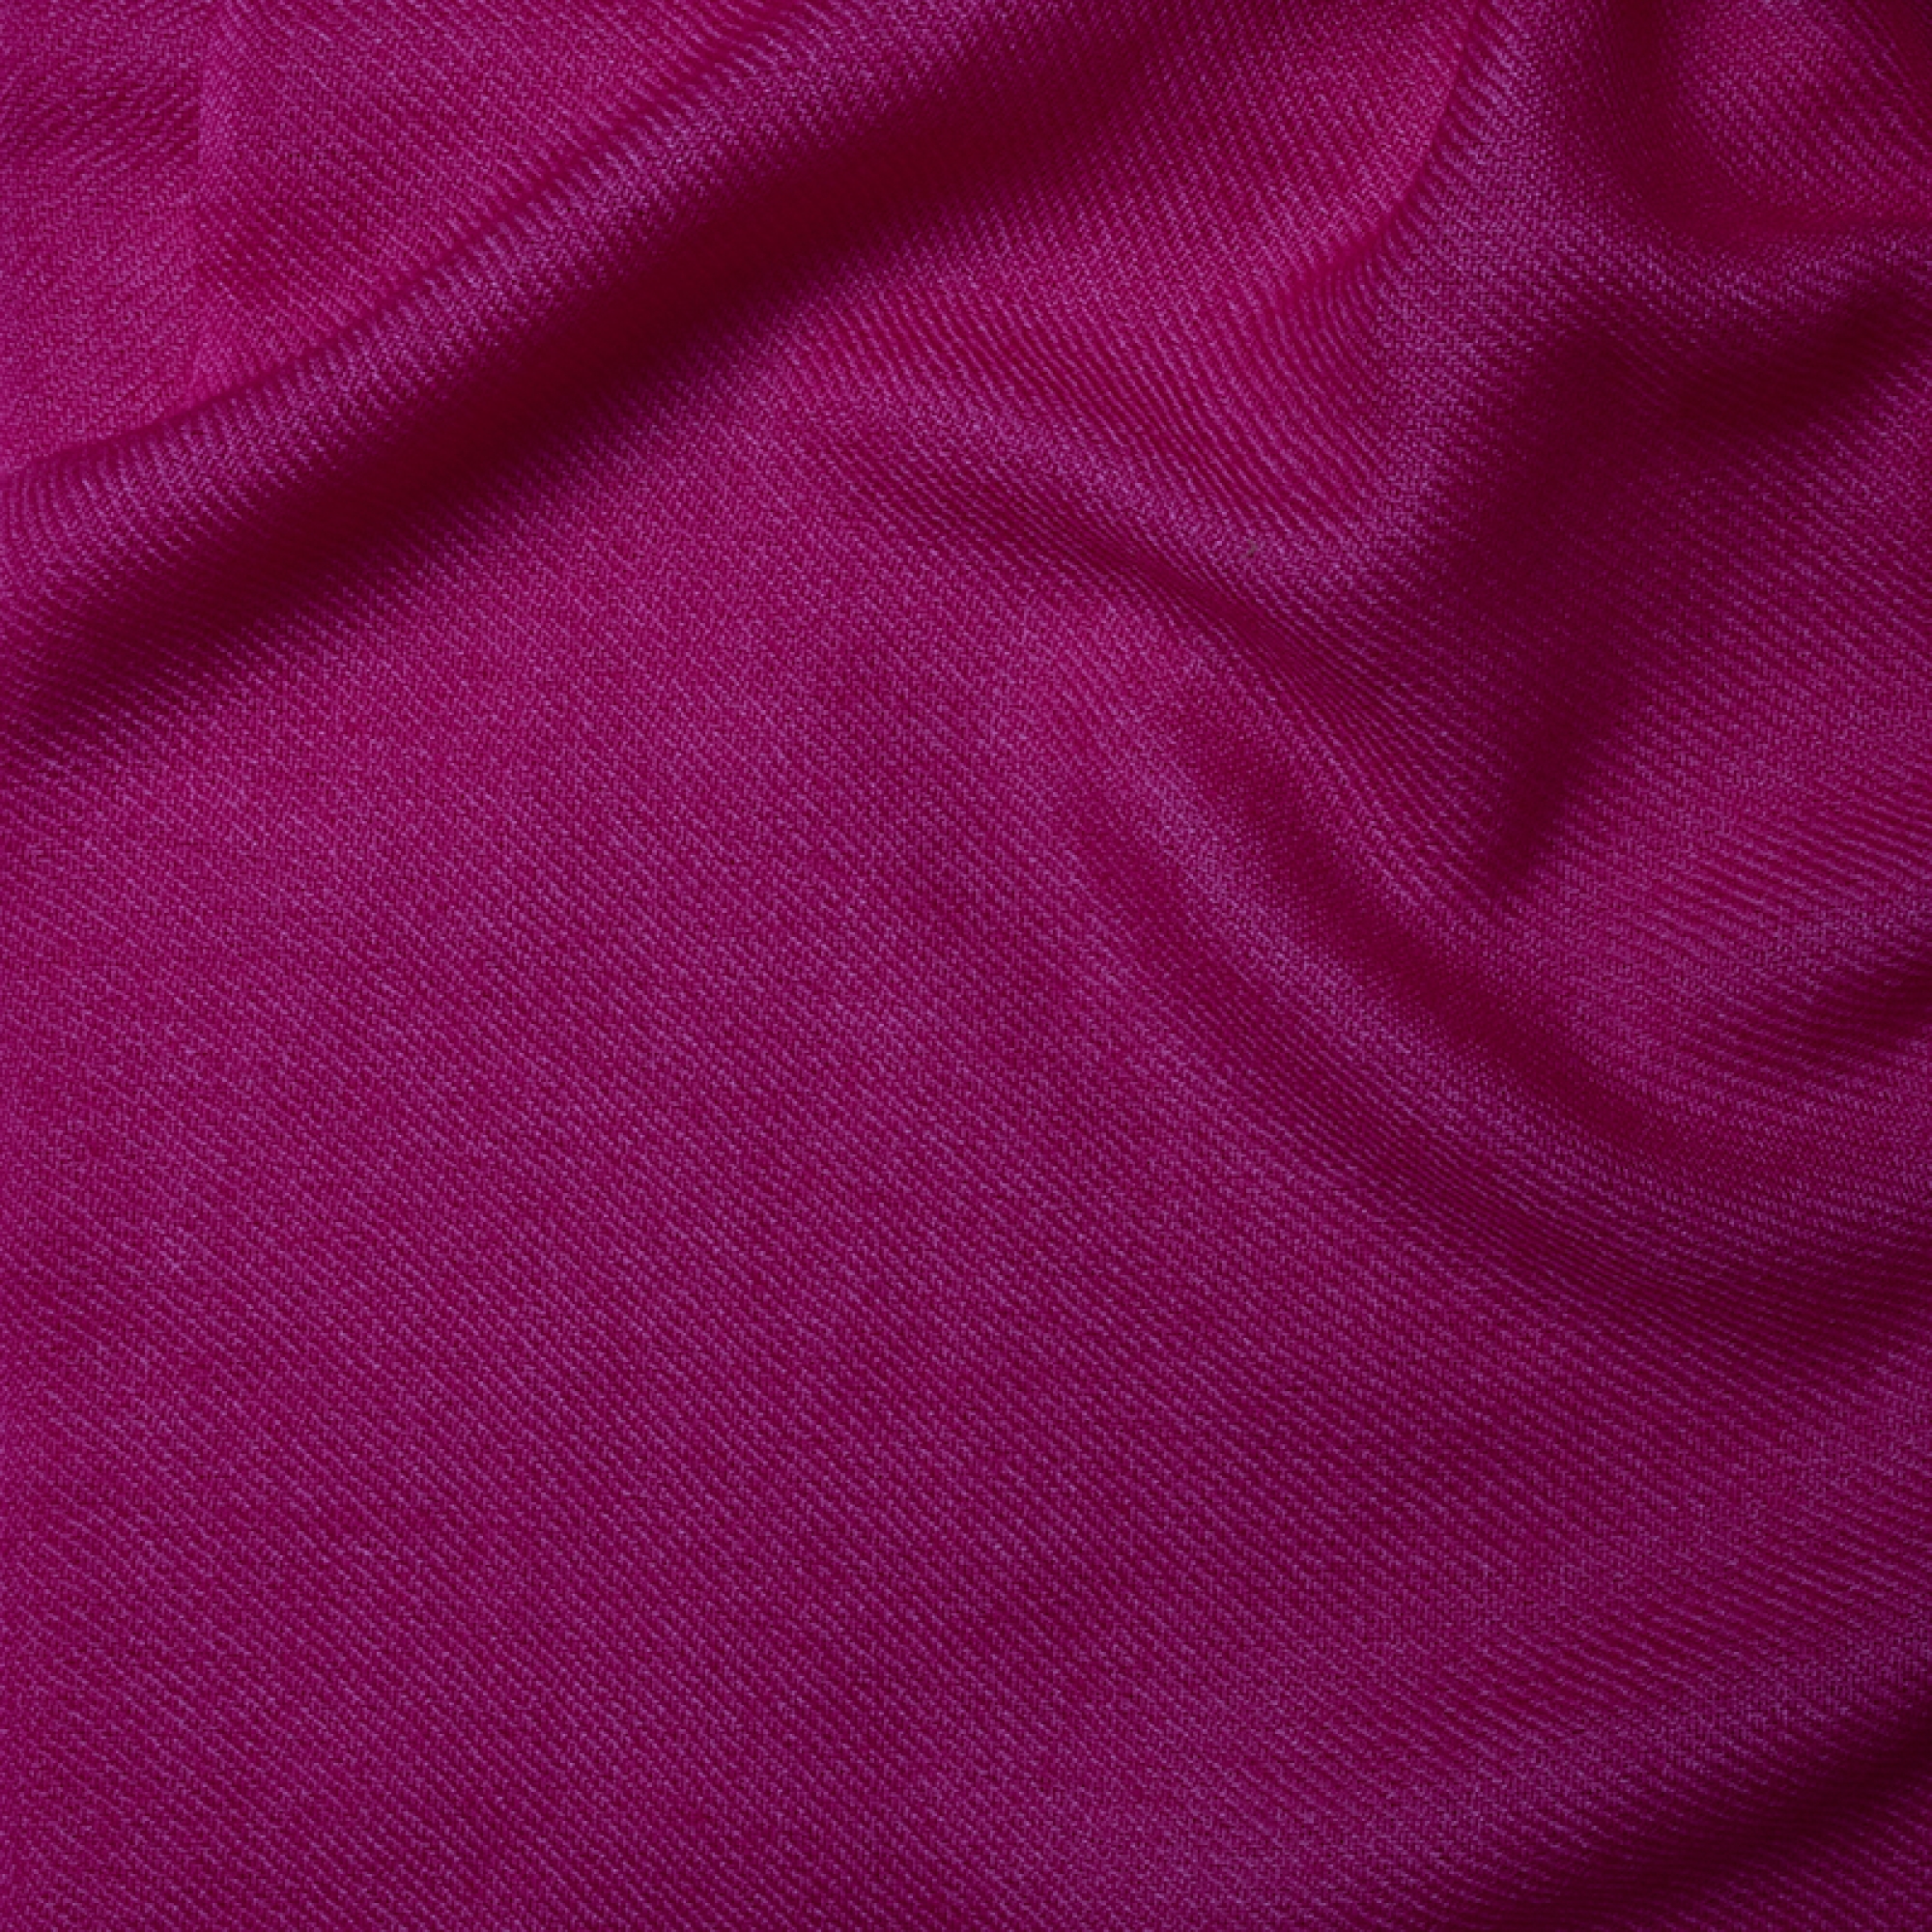 Cashmere accessories cocooning toodoo plain m 180 x 220 flashing pink 180 x 220 cm